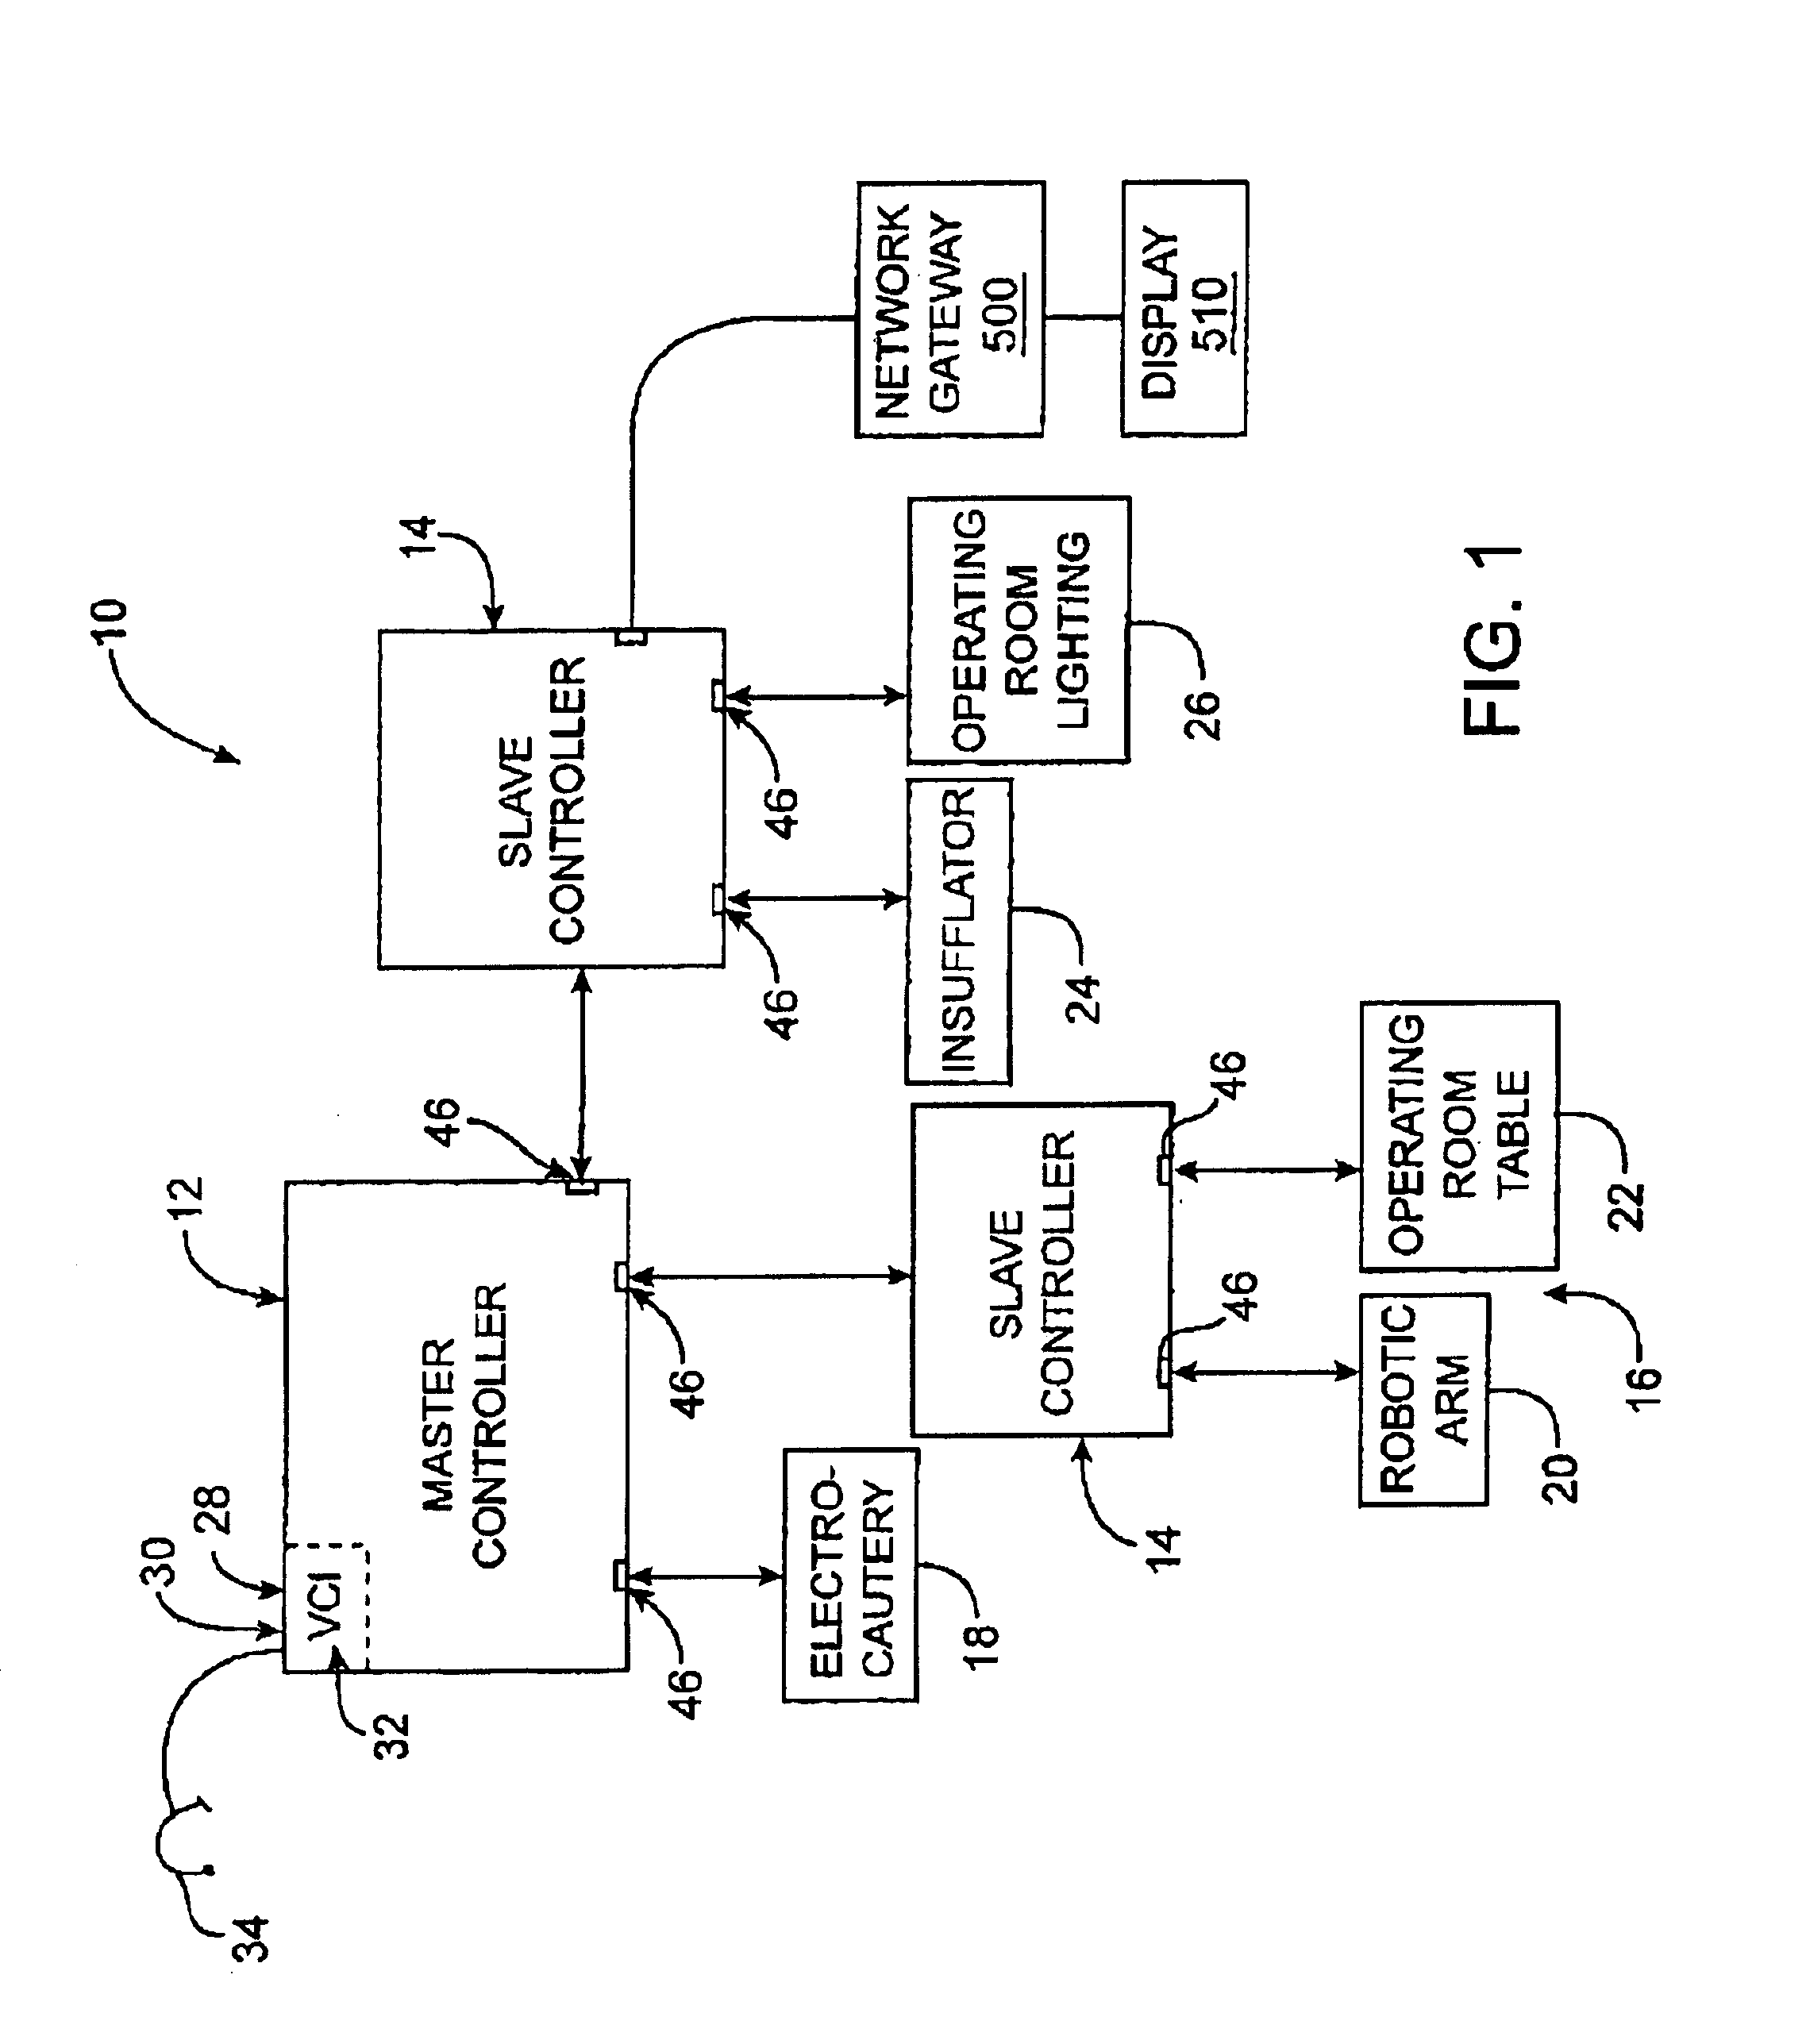 Method and apparatus for accessing medical data over a network